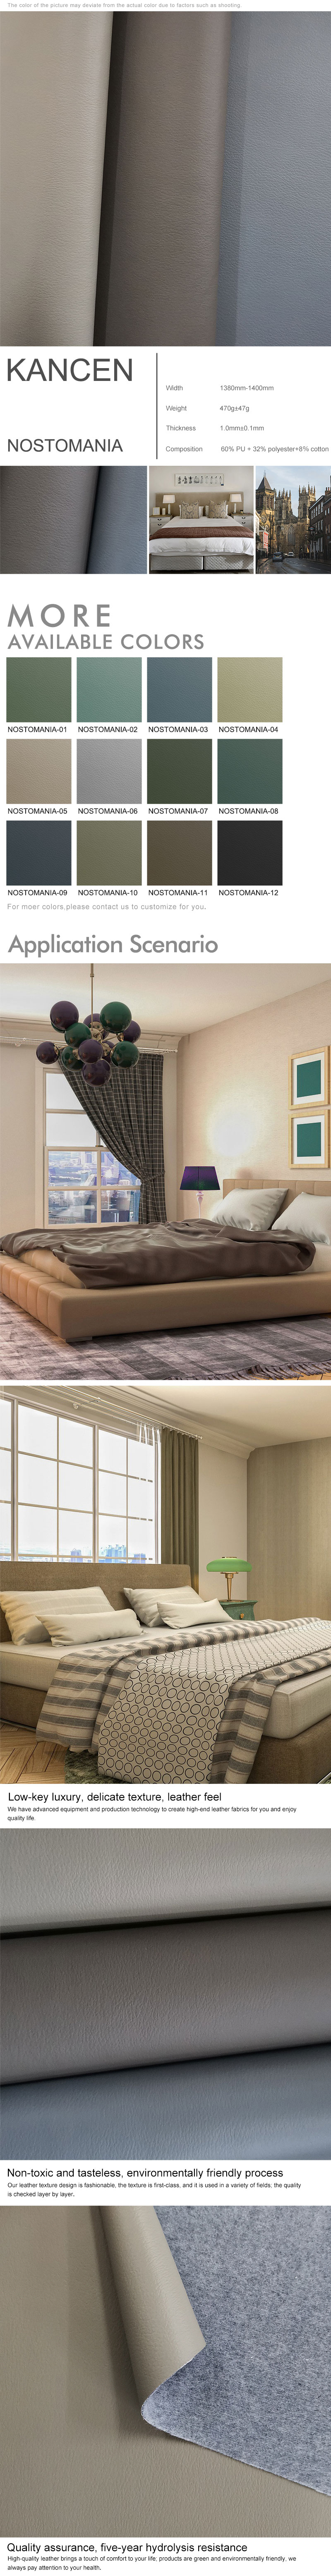 DMF free synthetic Bed Leather - KANCEN